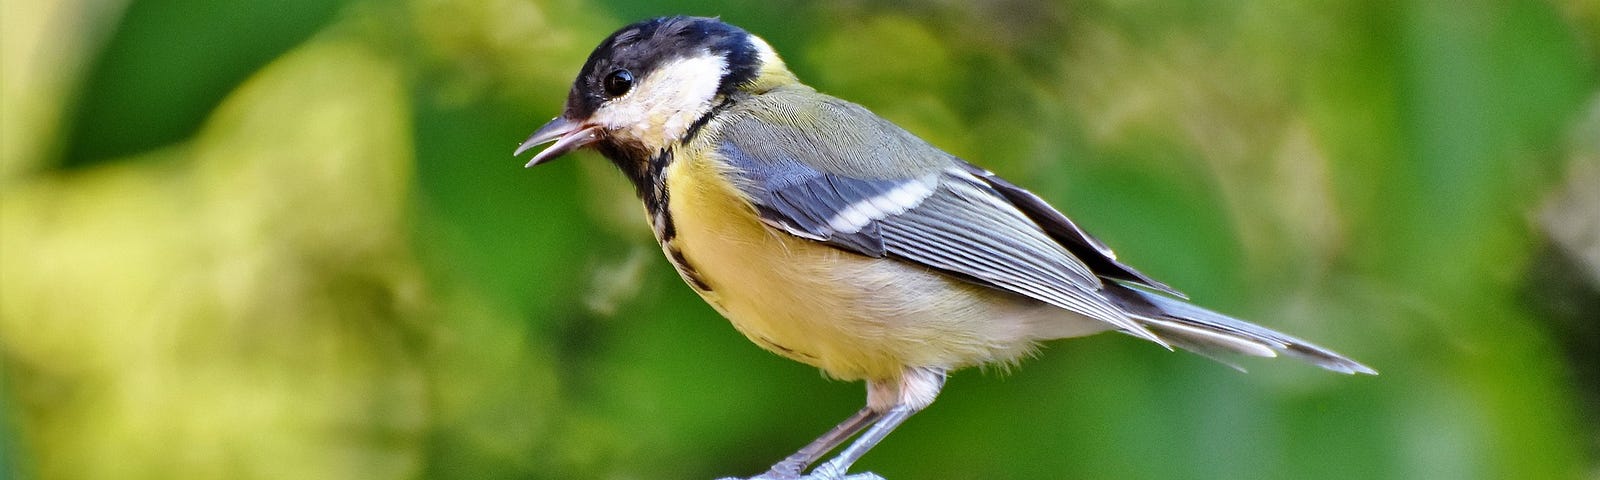 A small songbird, white black and yellow